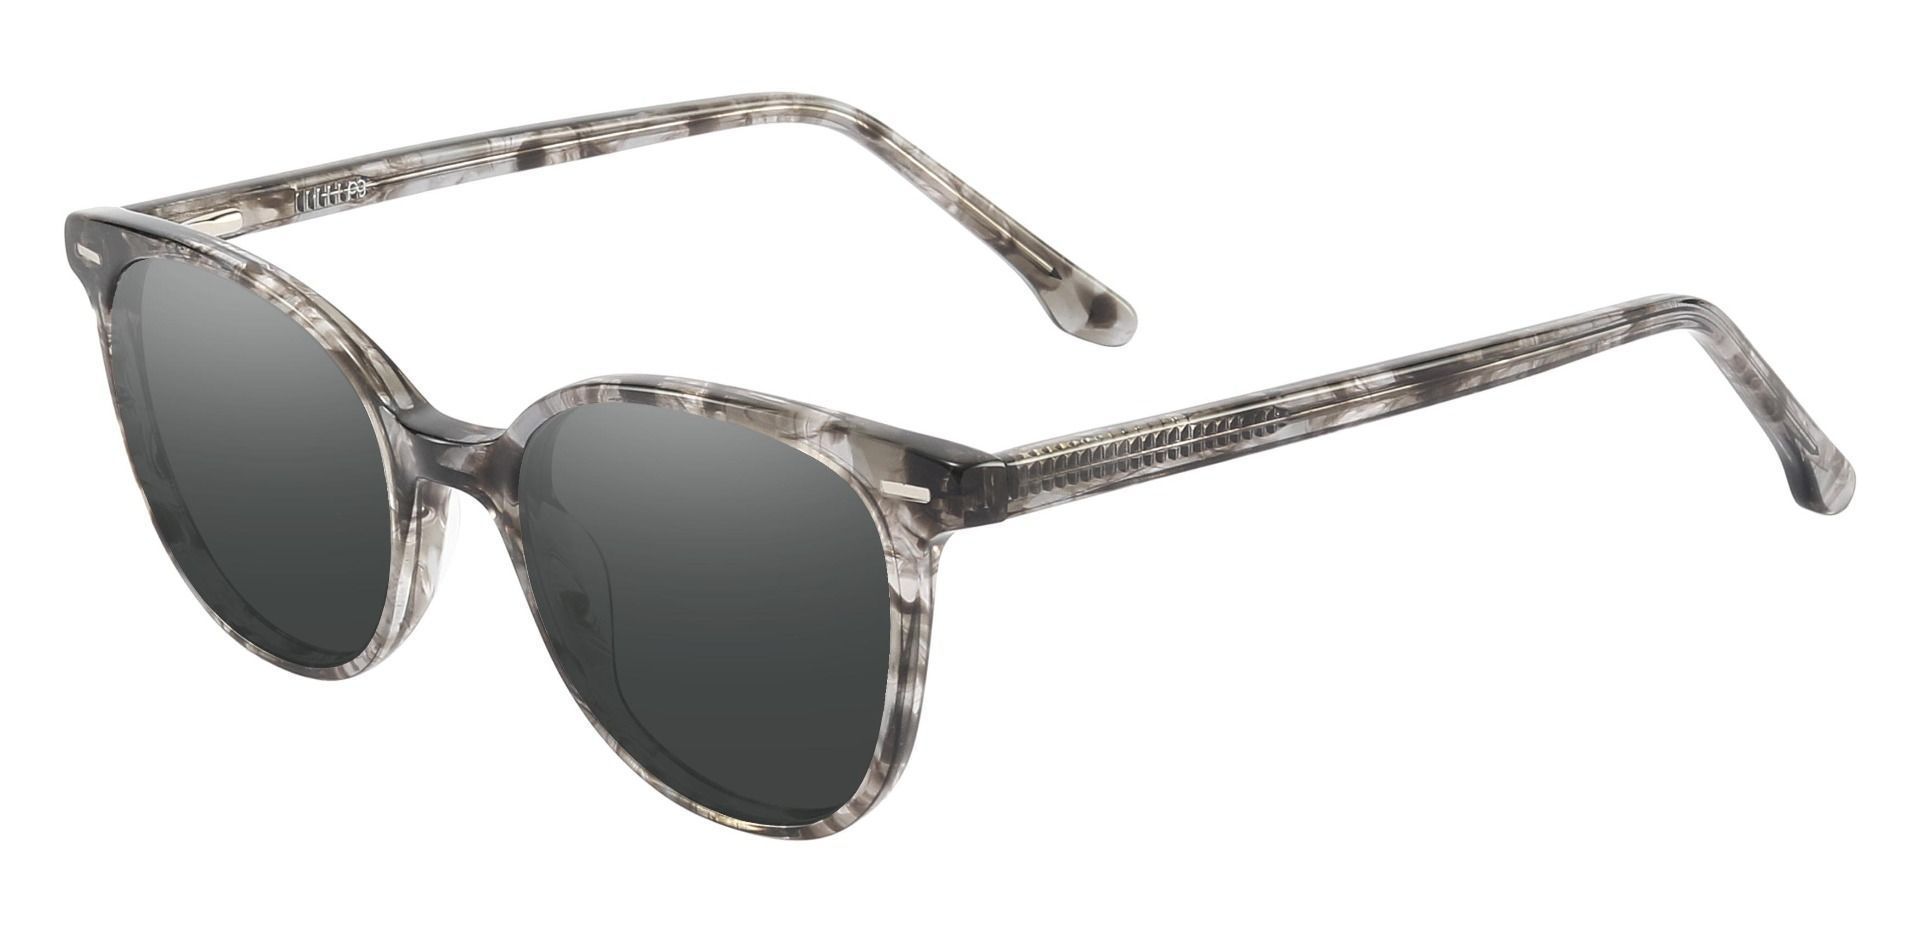 Chili Oval Reading Sunglasses - Gray Frame With Gray Lenses